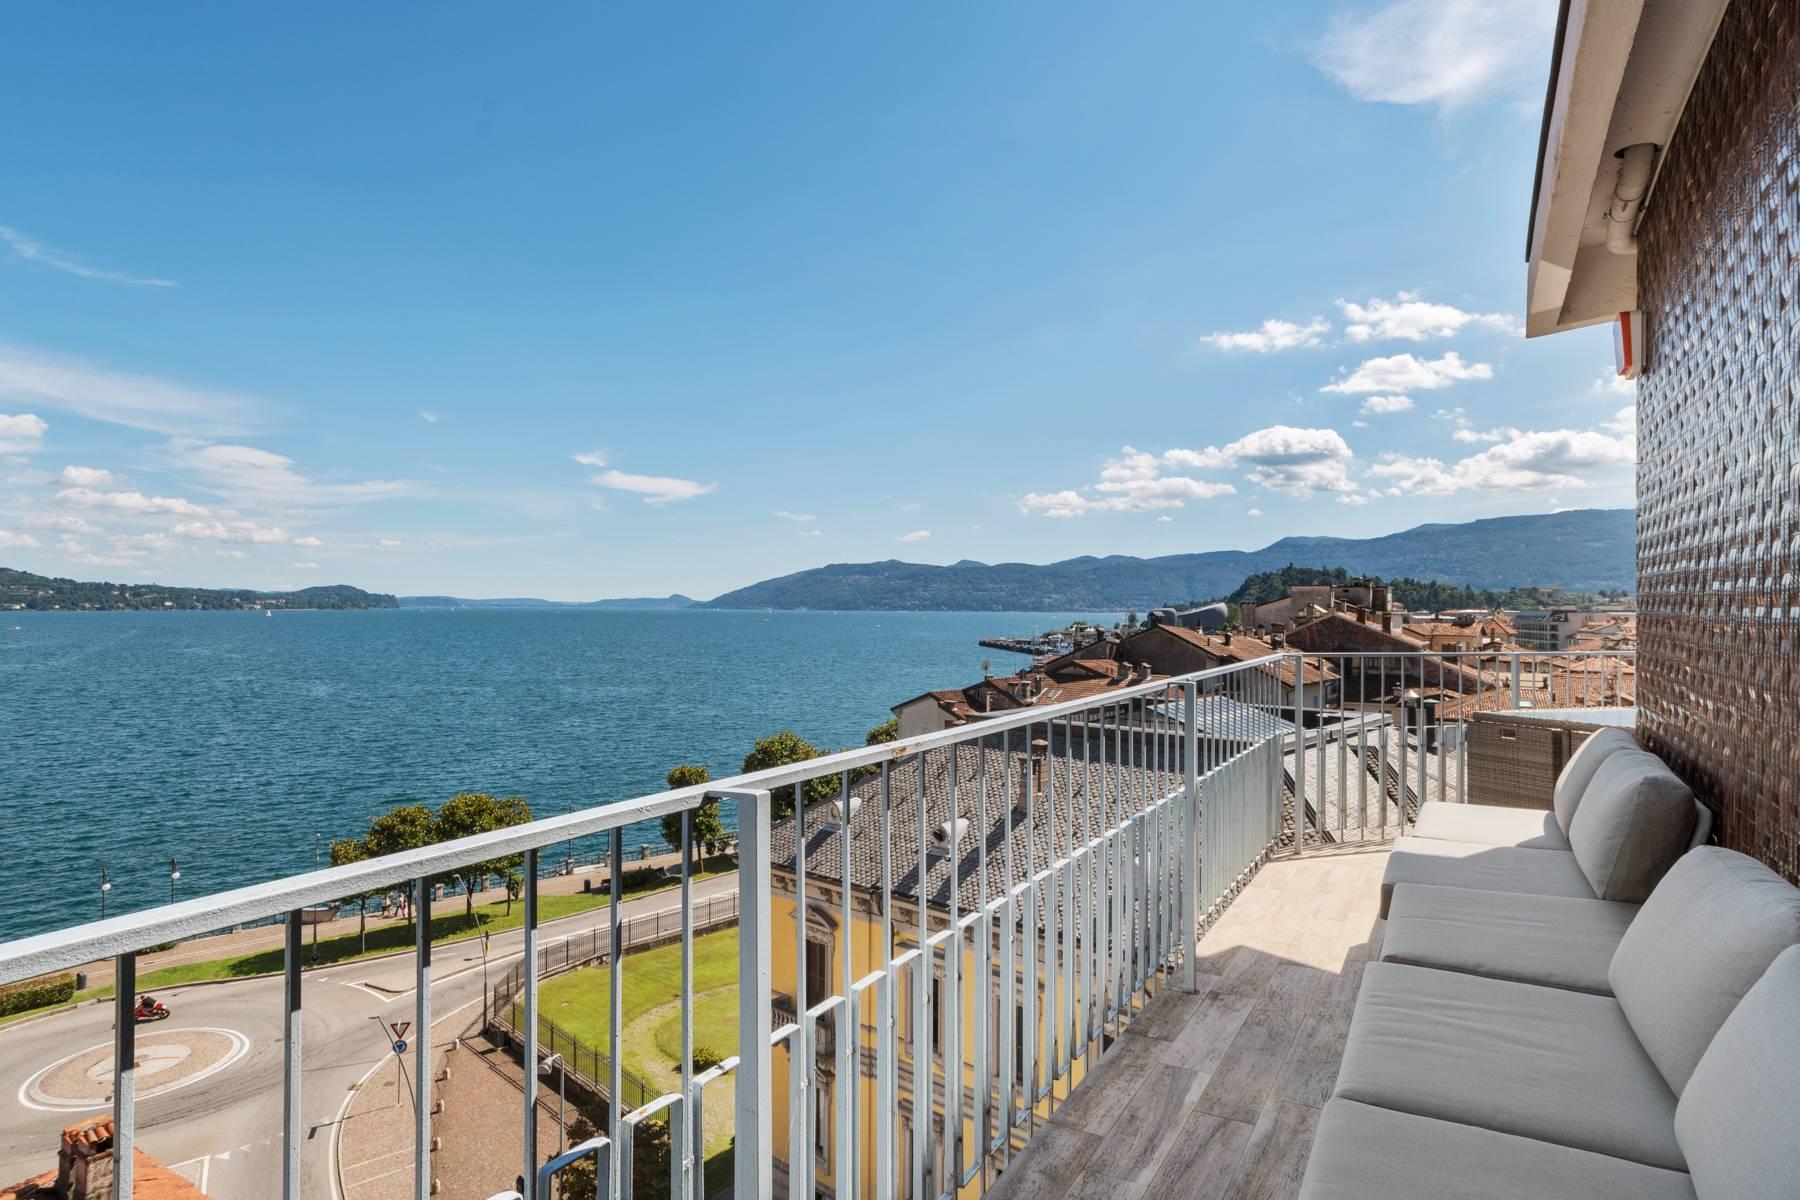 Breathtaking penthouse with balcony and terrace overlooking all the lake Maggiore located in the center of Intra - 1